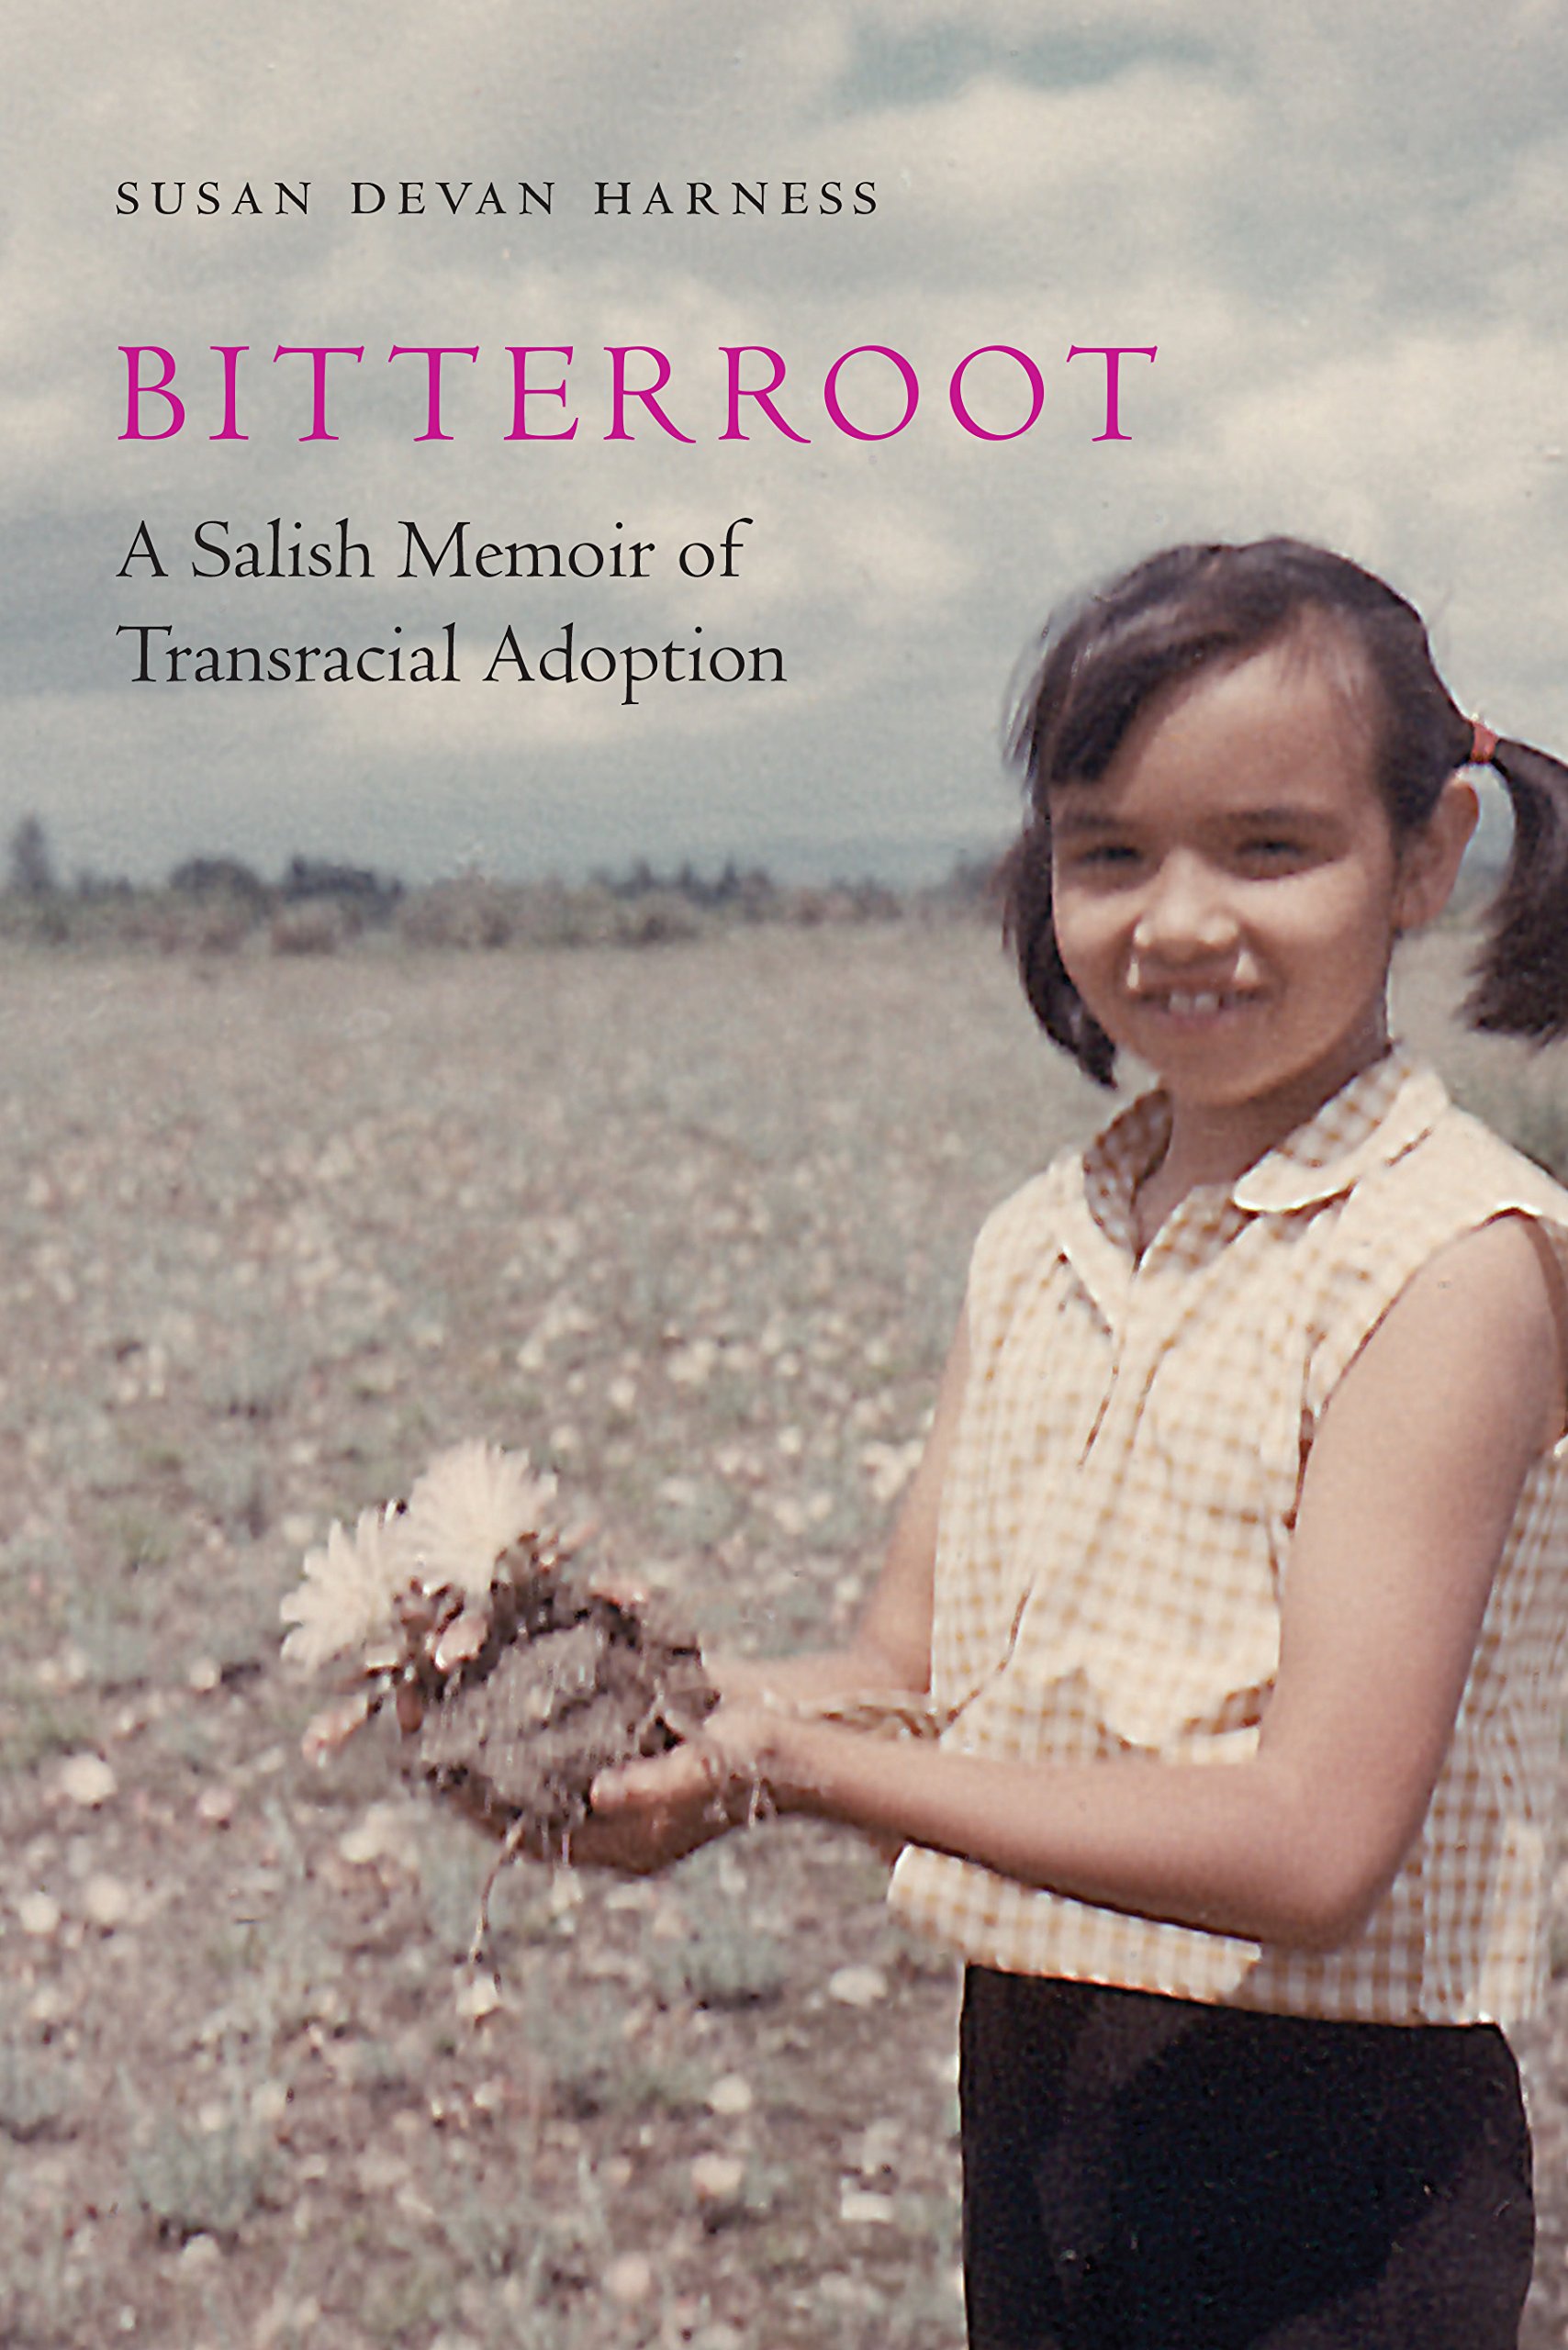 Image of the cover of the book, Bitterroot by Susan Devan Harness. The cover shows a photo of a young girl with two pony tails, a sleeveless gingham shirt, and a handful of soil and flowers. She is smiling at the person taking the photo. She is surrounded by flat grasslands.